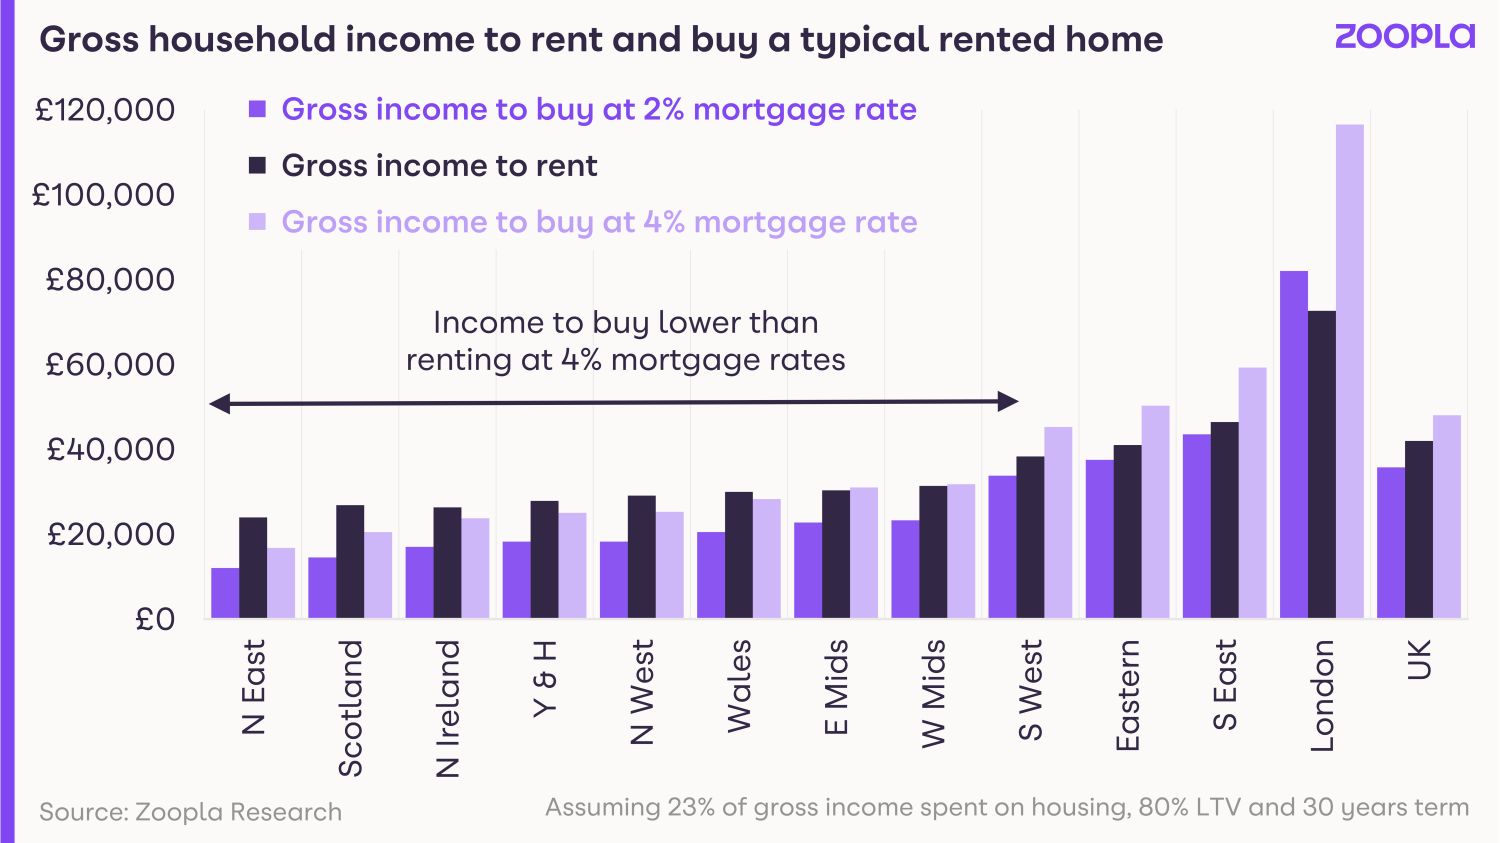 HPI Aug 2022: gross household income to rent and buy a typical home in 2022